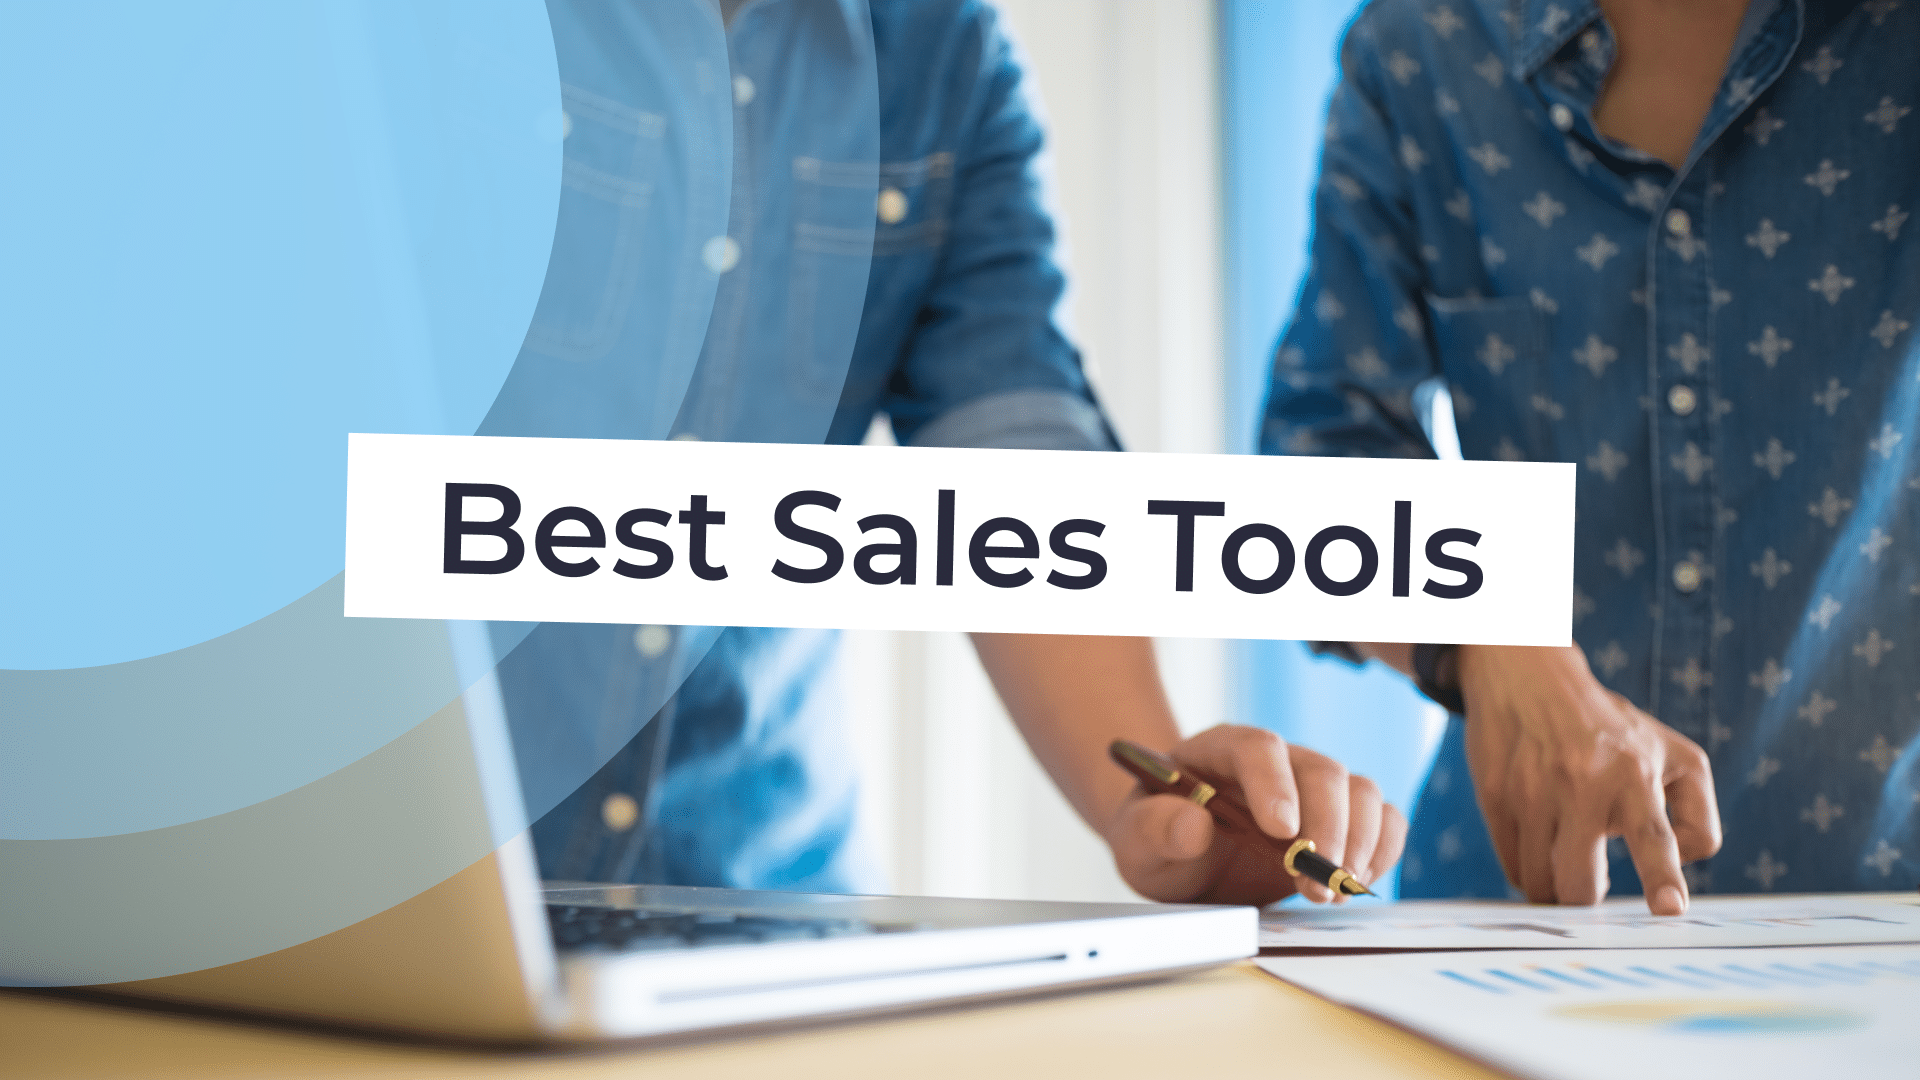 The 28 Best Sales Tools to Fast-track Leads | 2023 List